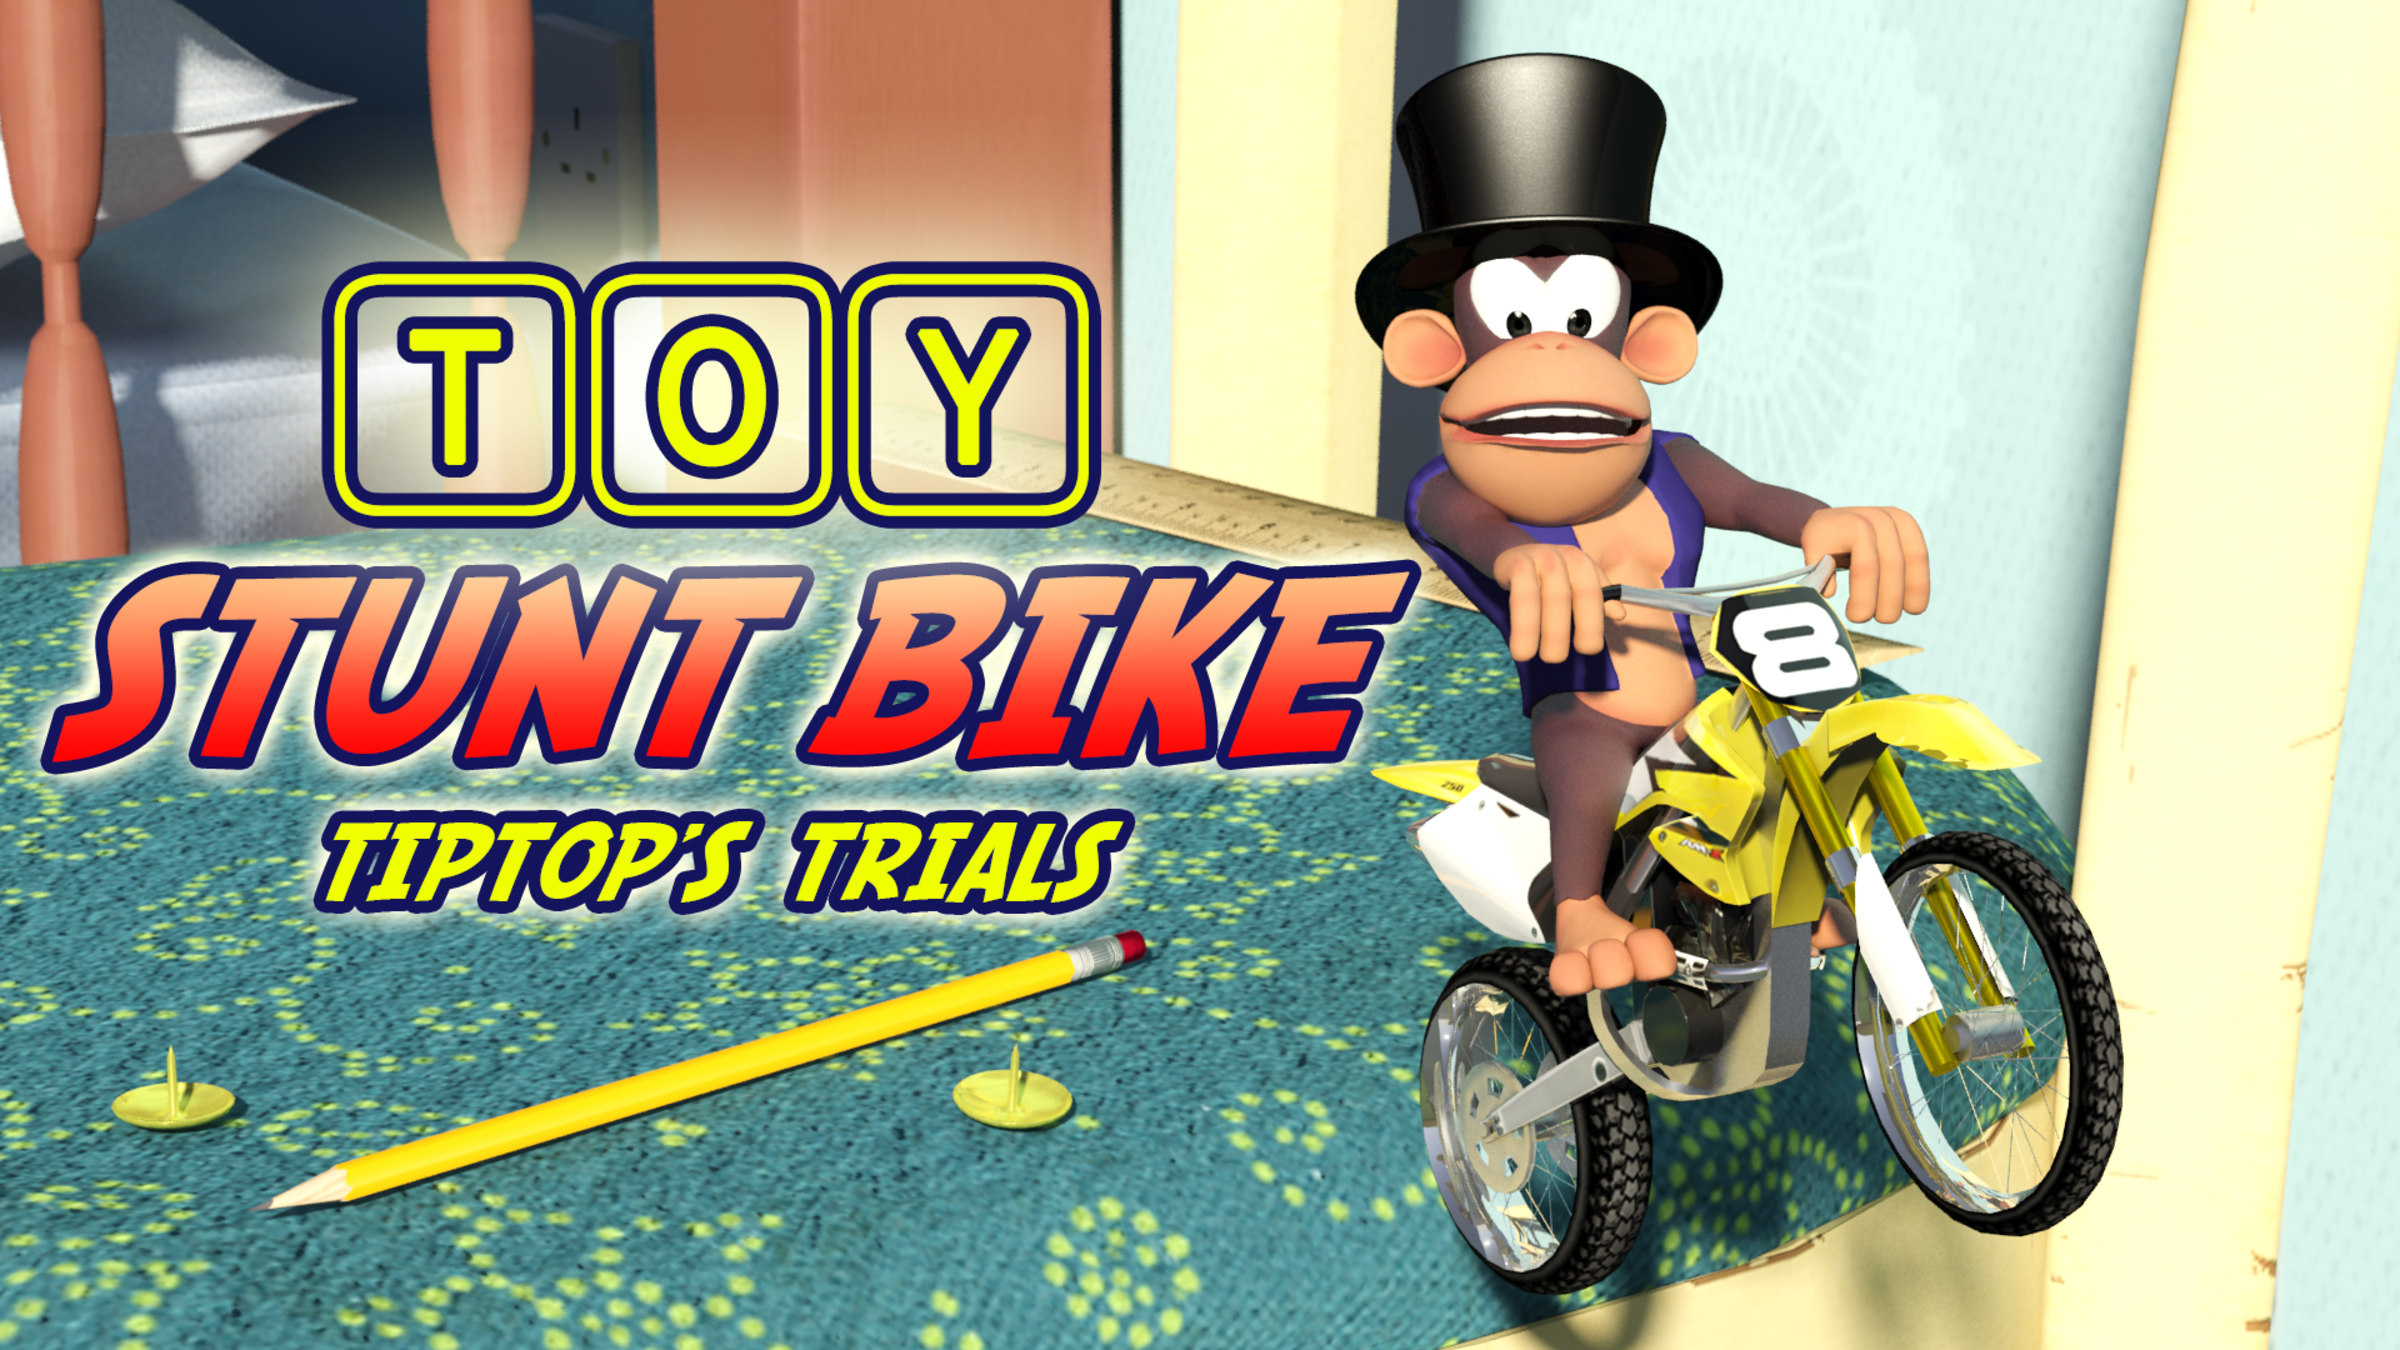 Toy Stunt Bike: Tiptop's Trials for Nintendo Switch - Nintendo Official Site